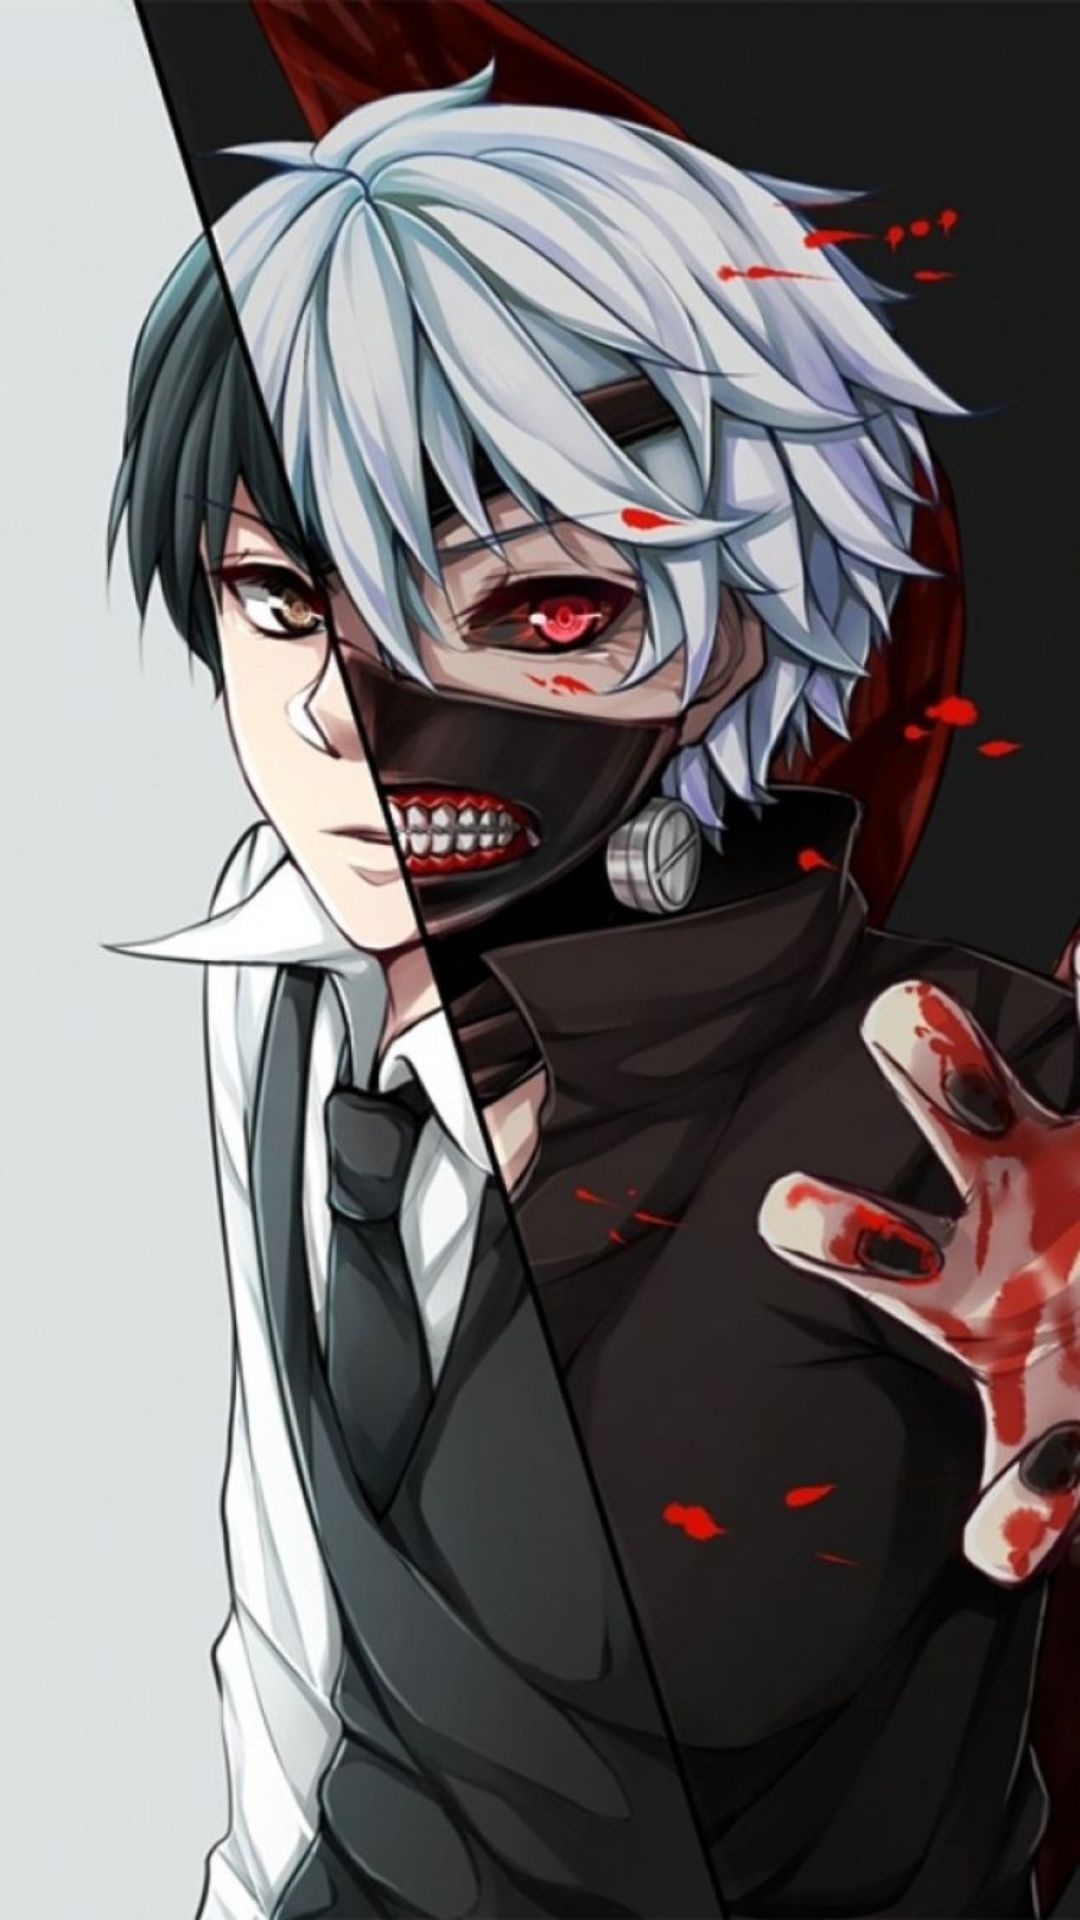 1080x1920 Tokyo Ghoul Wallpapers [Desktop,iPhone,Android,Mobile